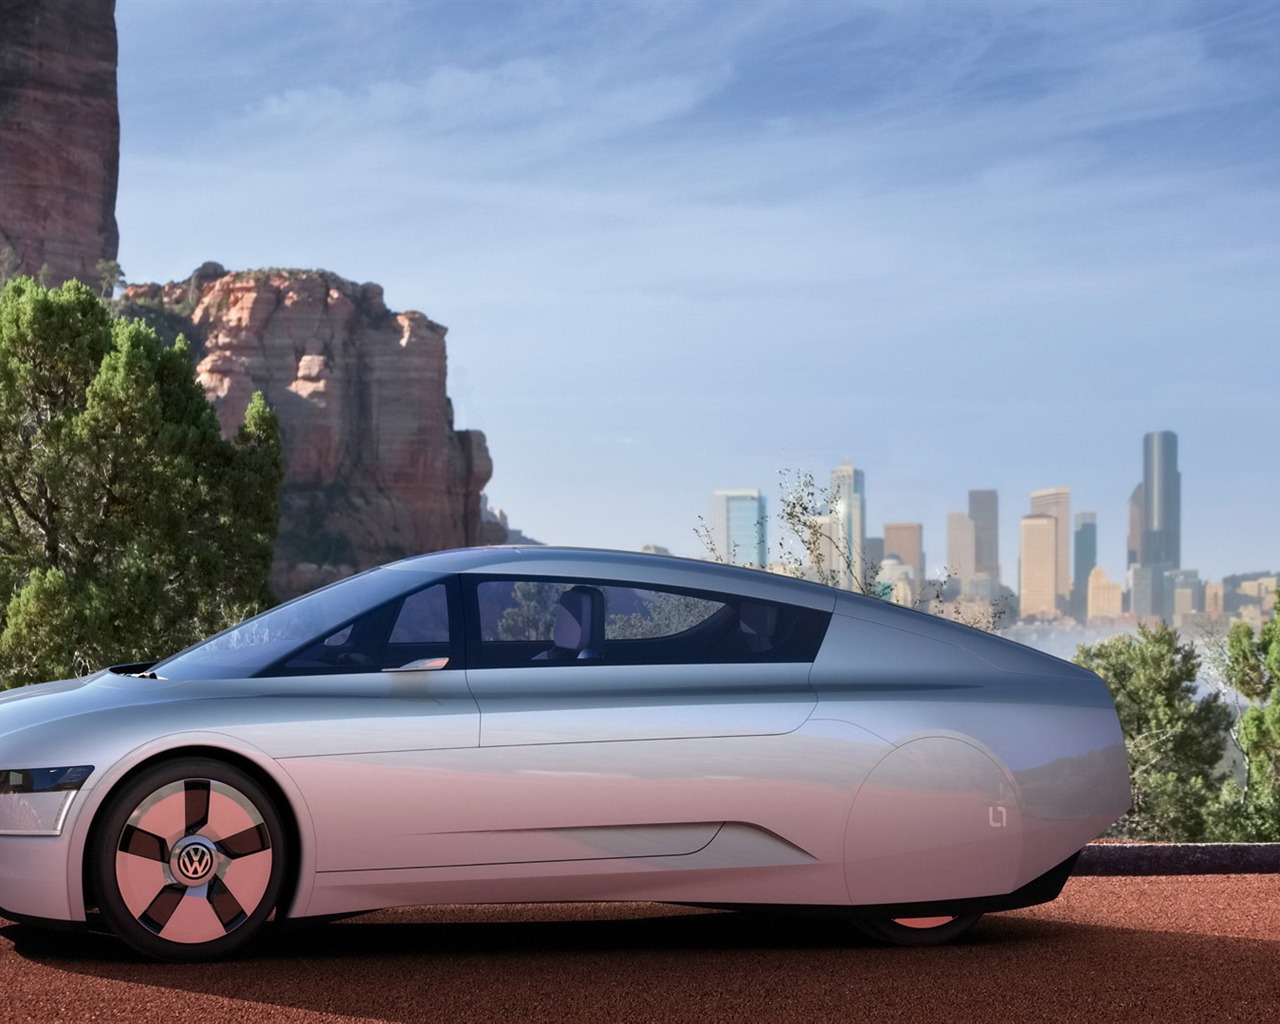 Volkswagen L1 Tapety Concept Car #16 - 1280x1024